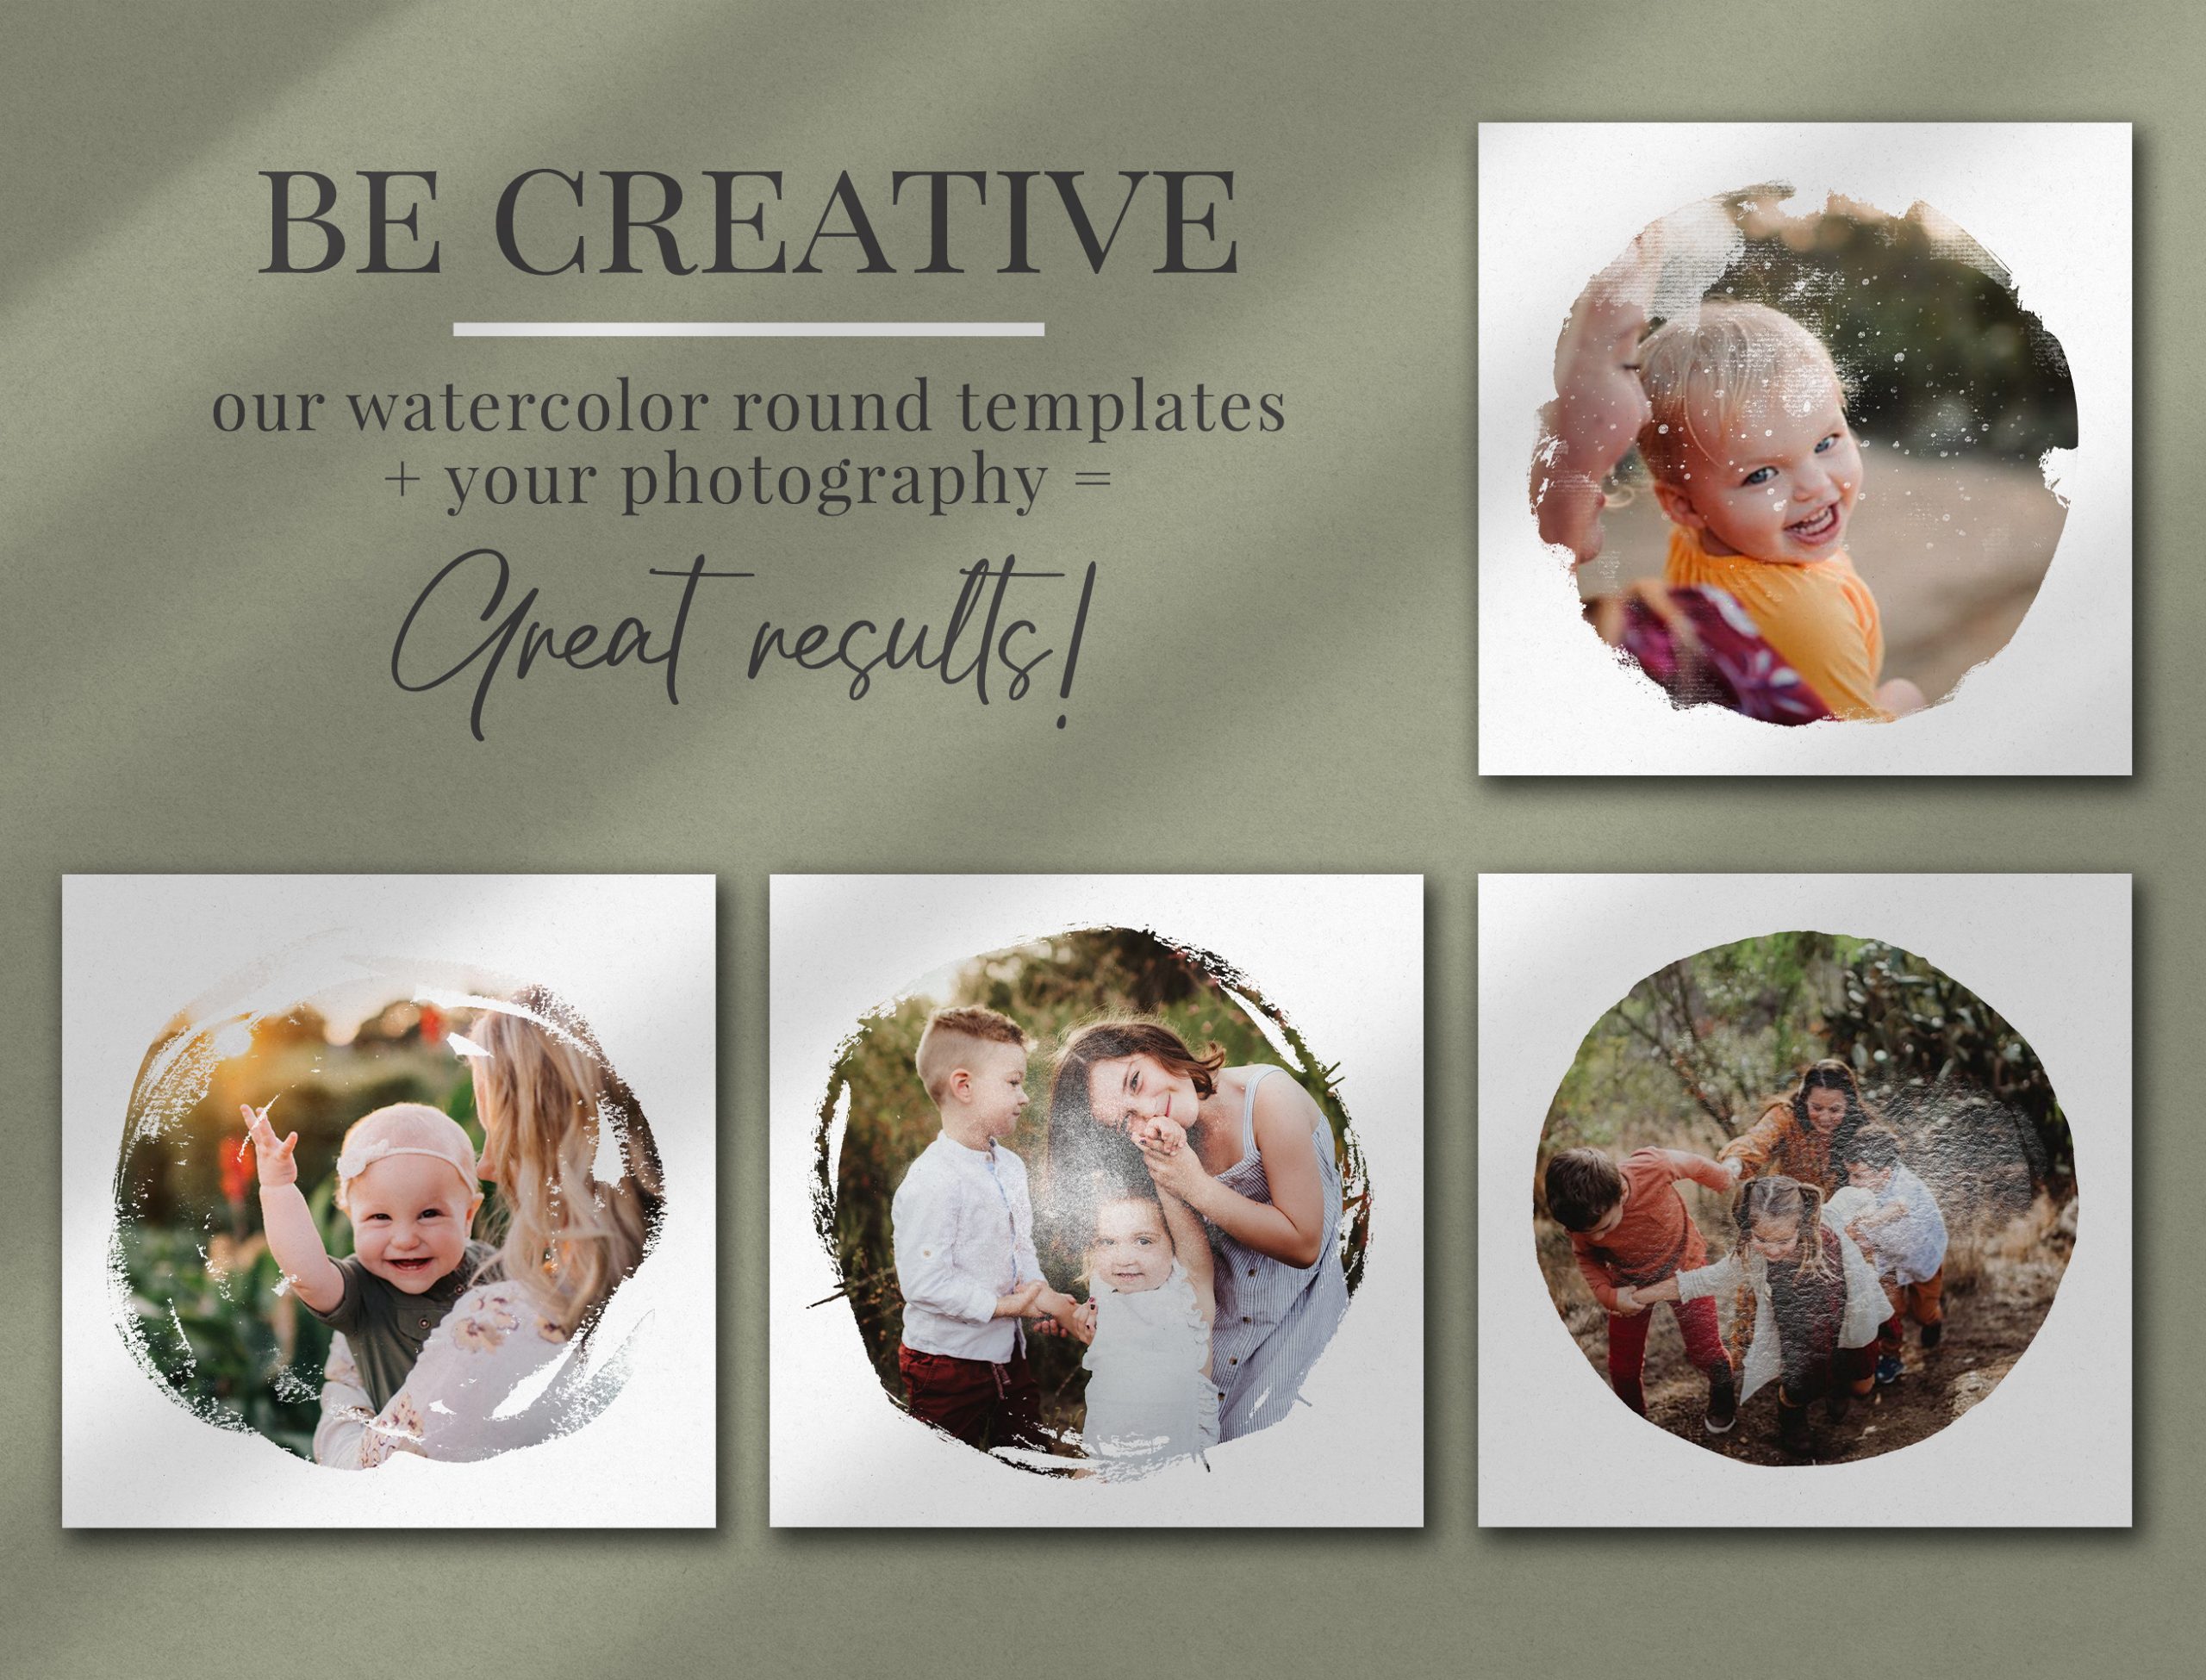 watercolor round photo masks